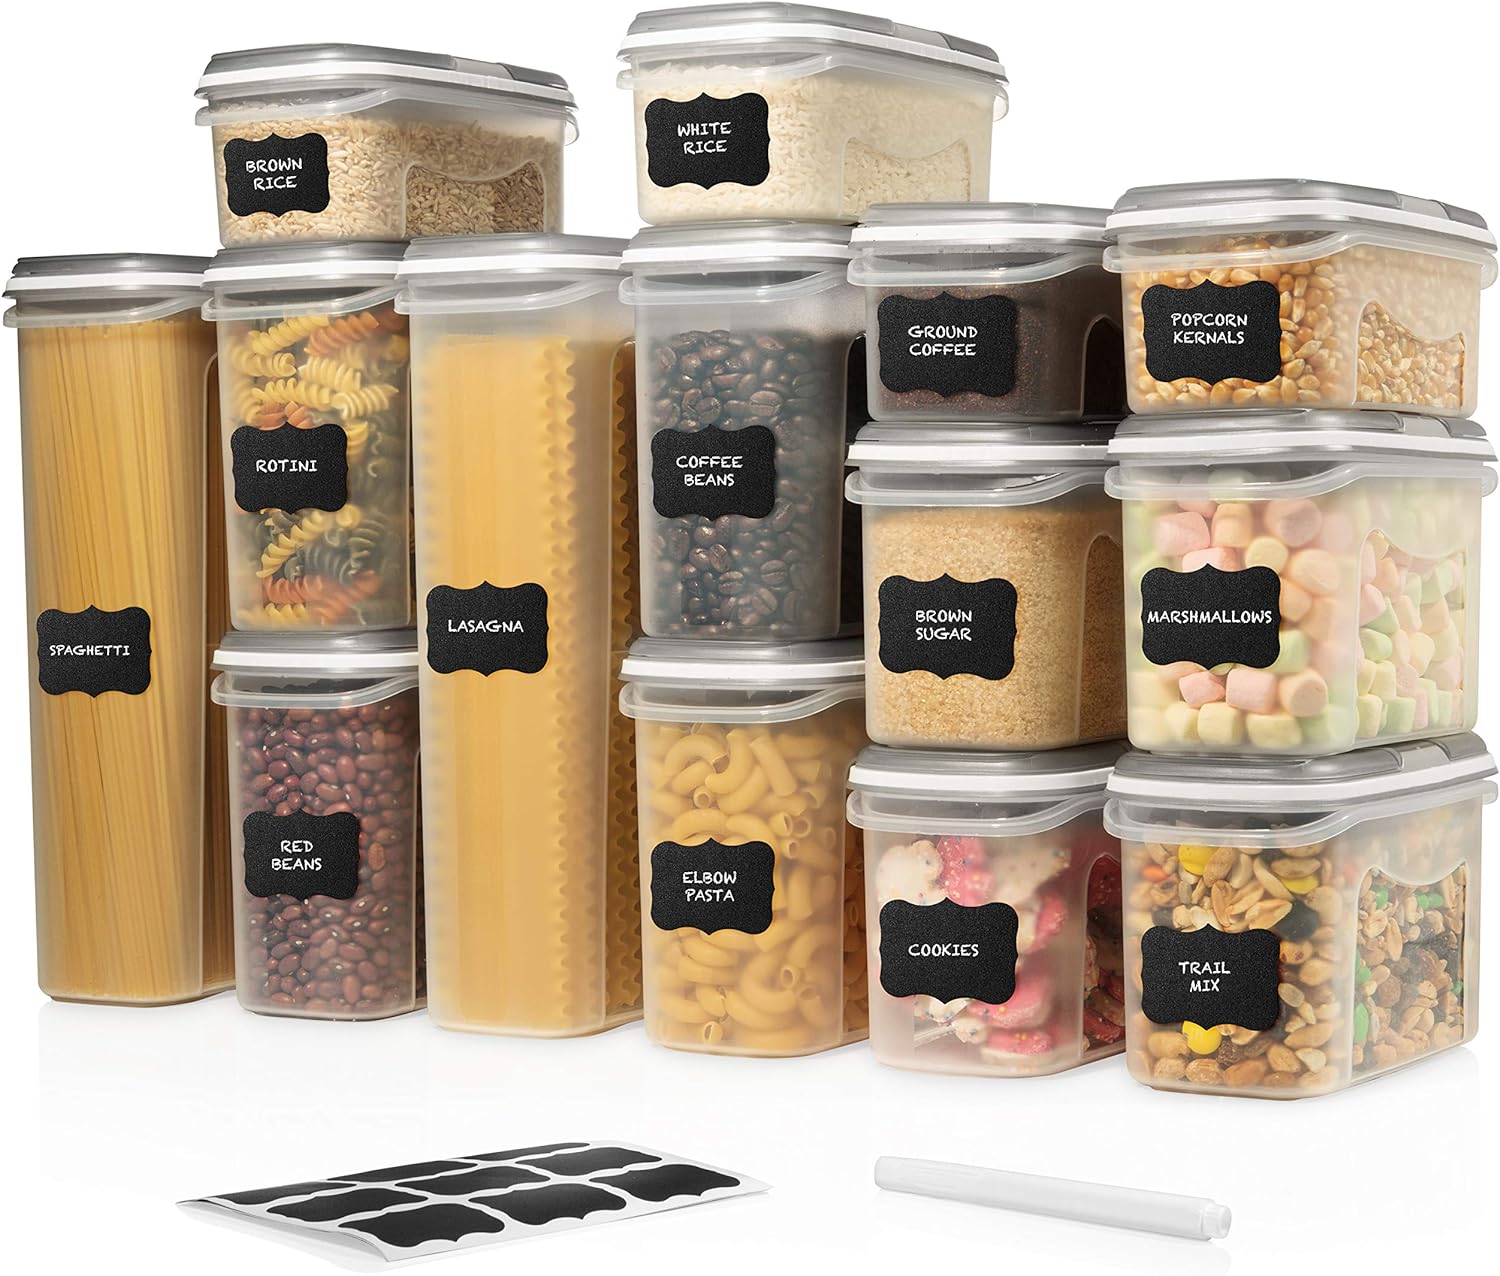 Shazo LARGE SET 28 pc Airtight Food Storage Containers with Lids (14 Container Set) Airtight Plastic Dry Food Space Saver Boxes, One